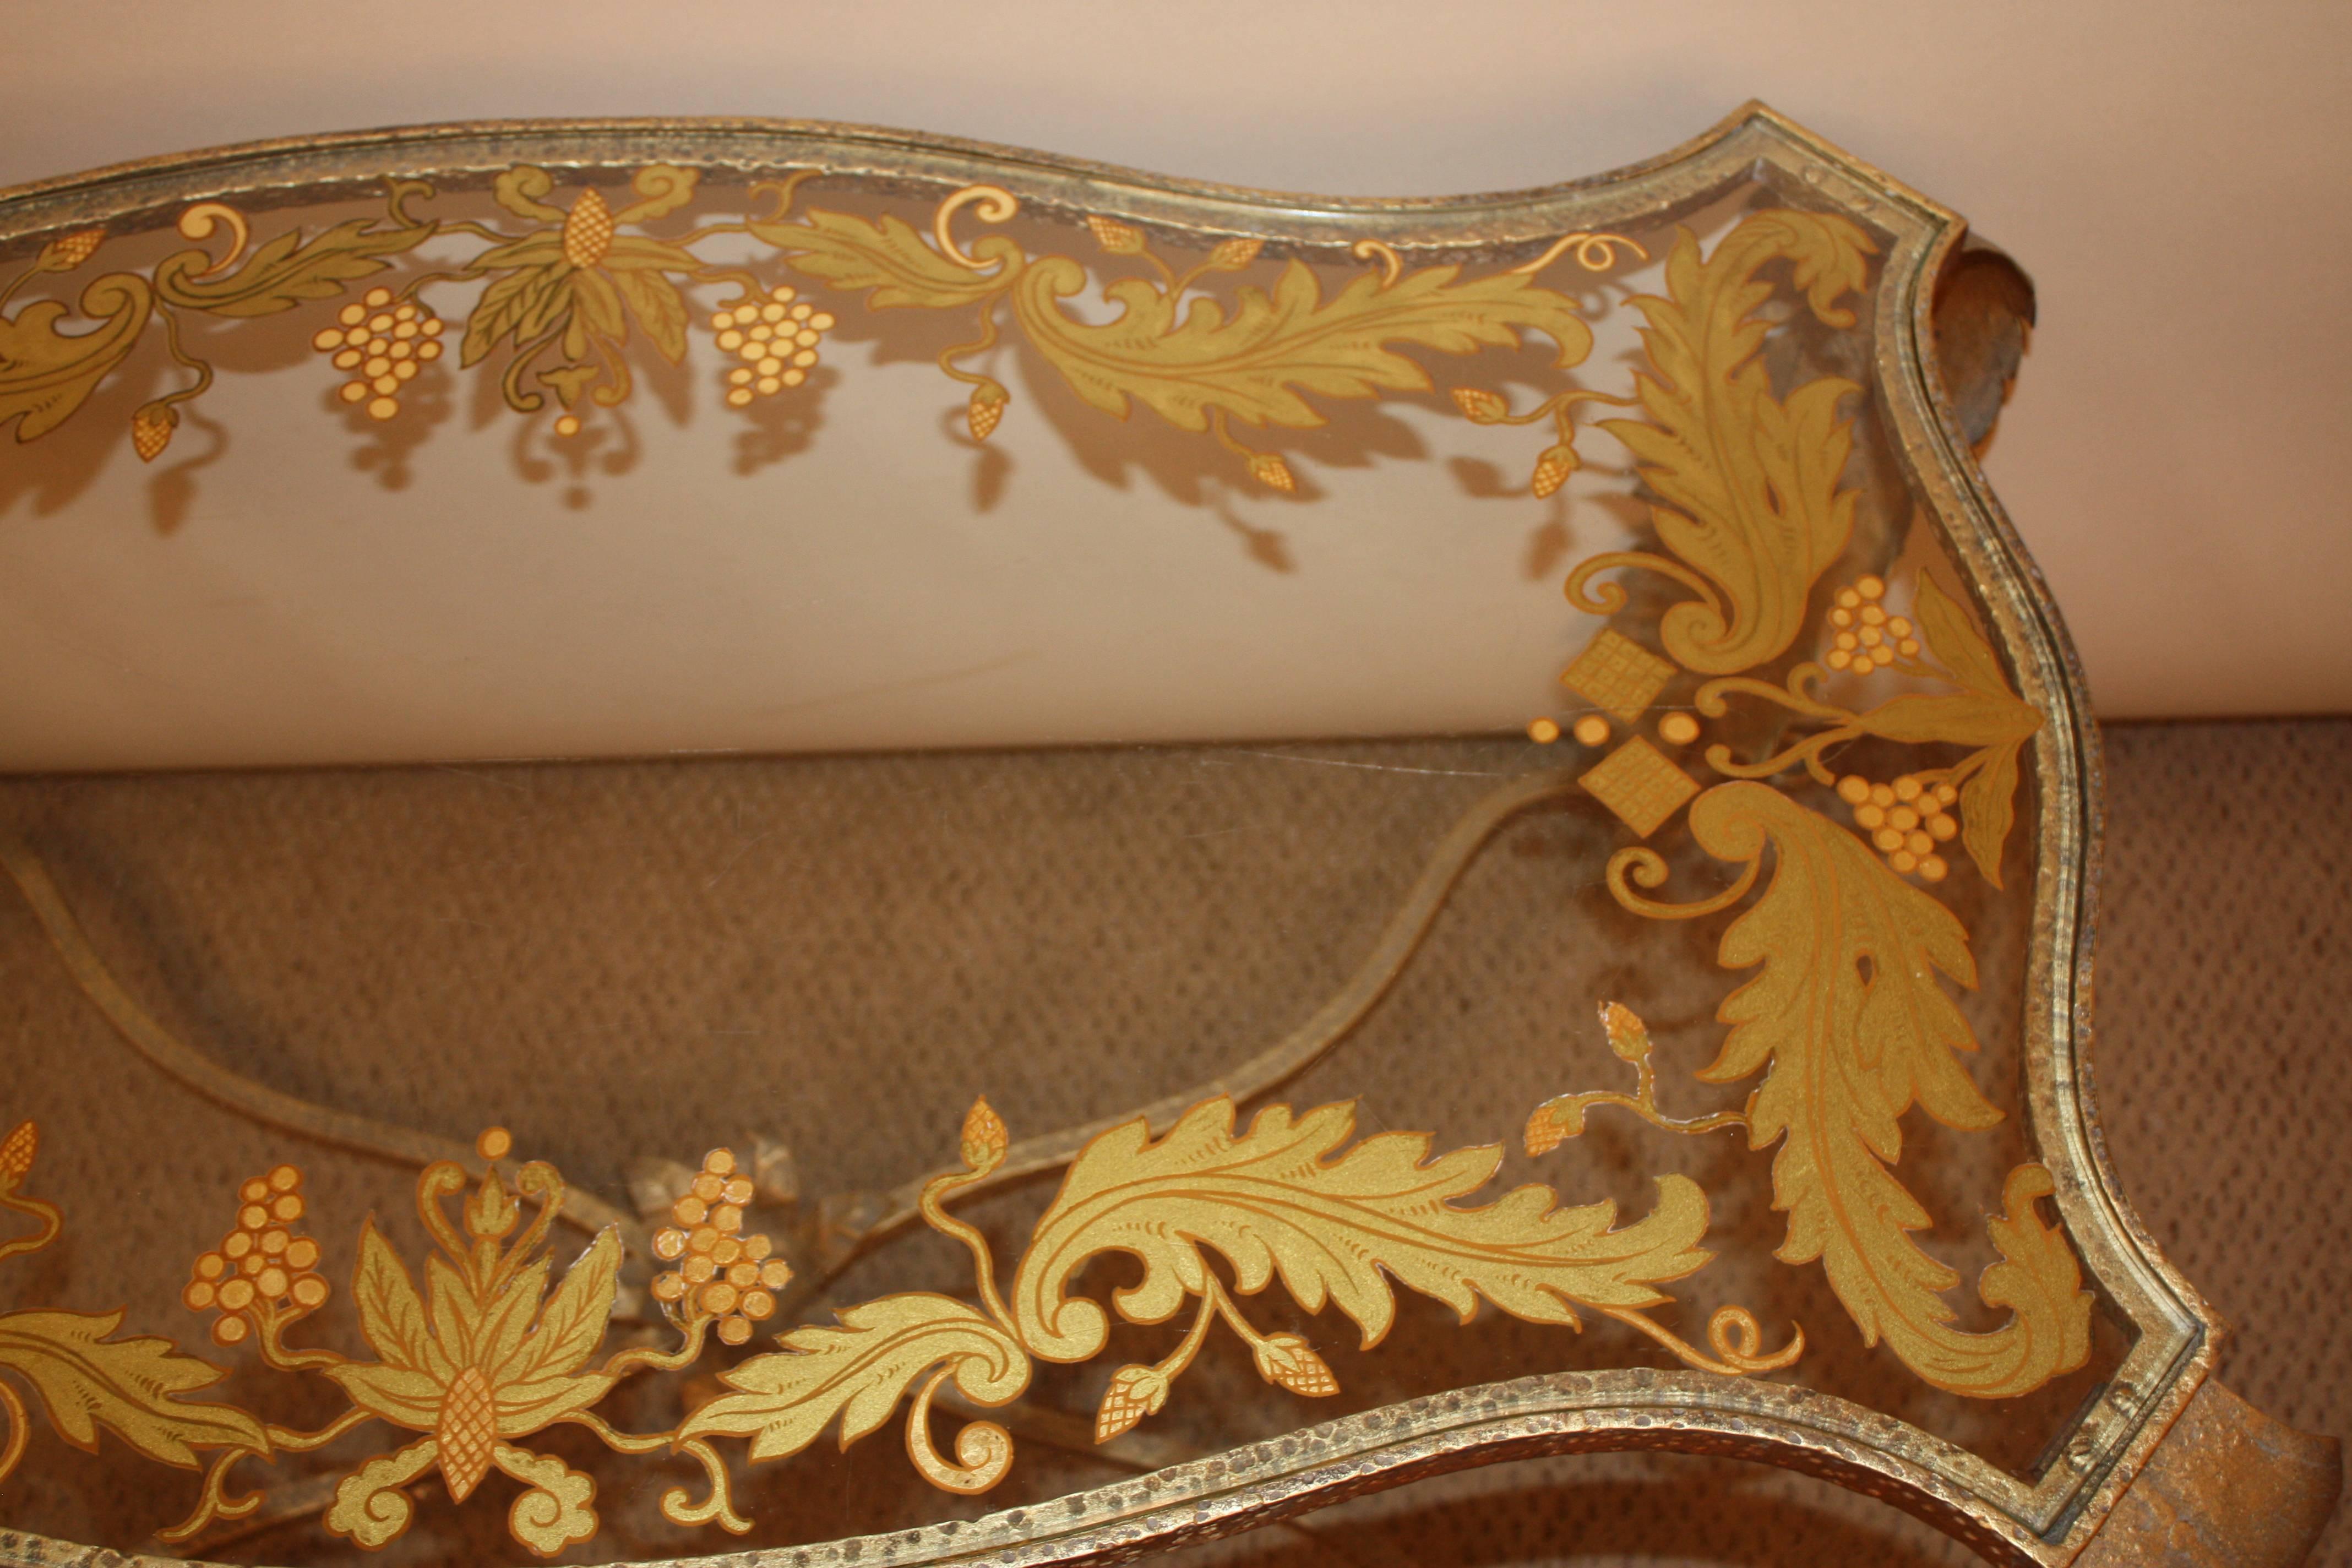 Wrought iron coffee table was finished in gold leaf with reverse paint glass top.